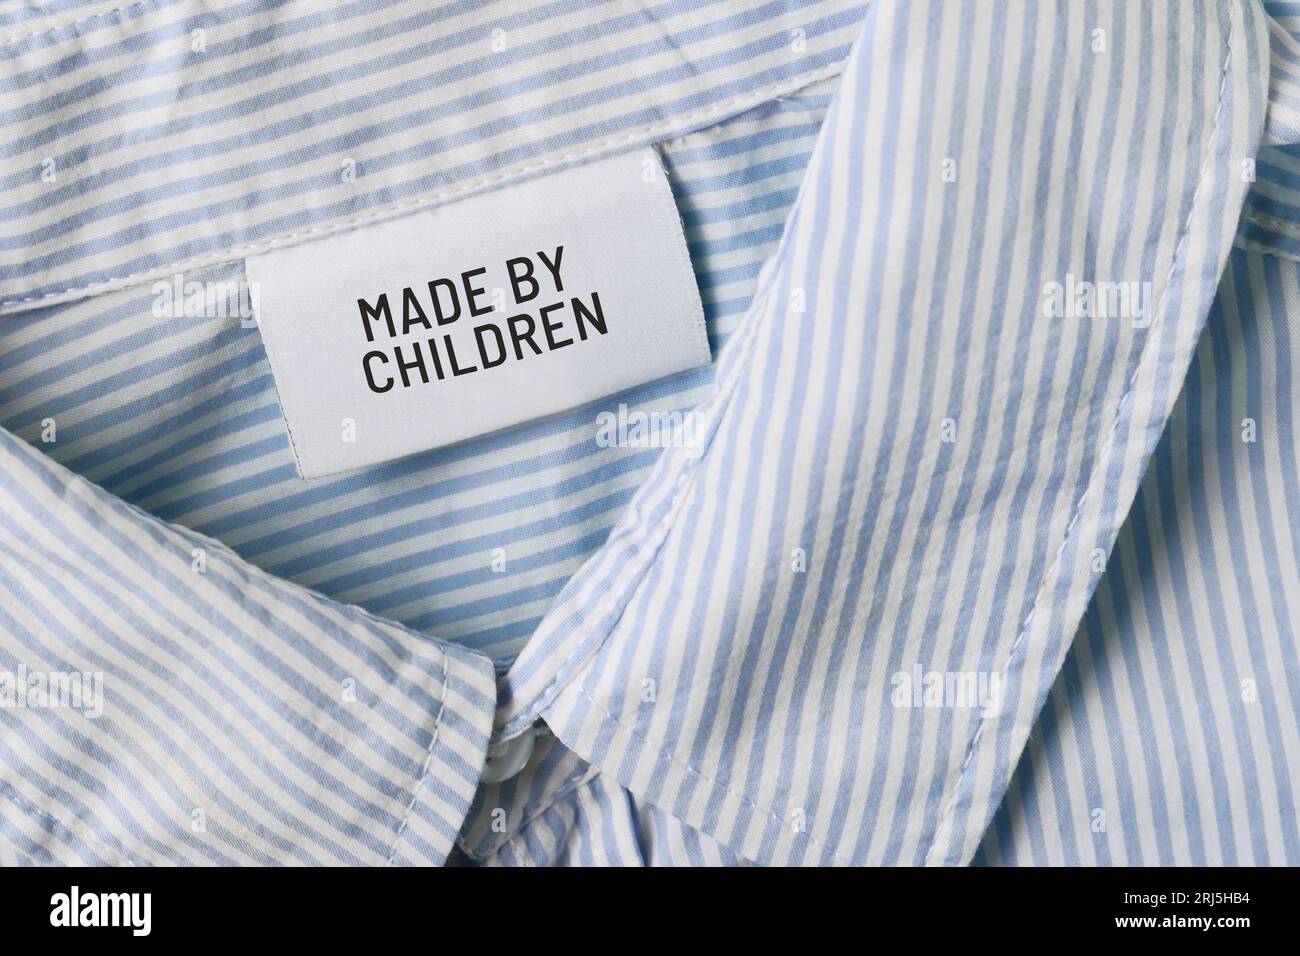 Clothing label with text saying 'Made by children'. Child labor concept Stock Photo